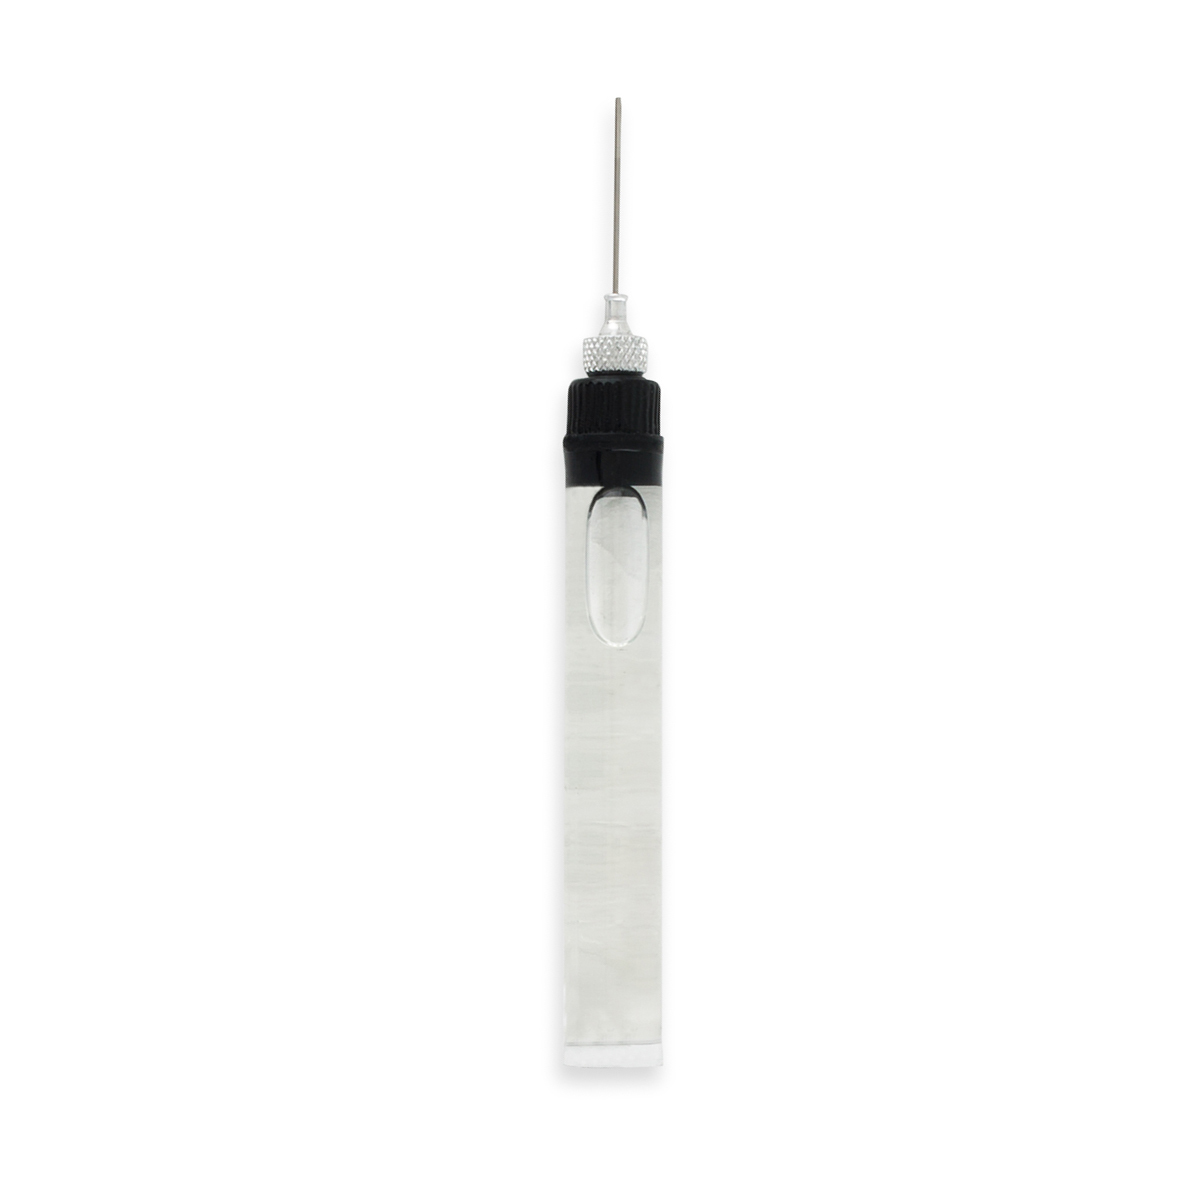 3 EACH REFILLABLE PRECISION NEEDLE POINT OILER WITH OIL EW2132 FISHING  SEWING